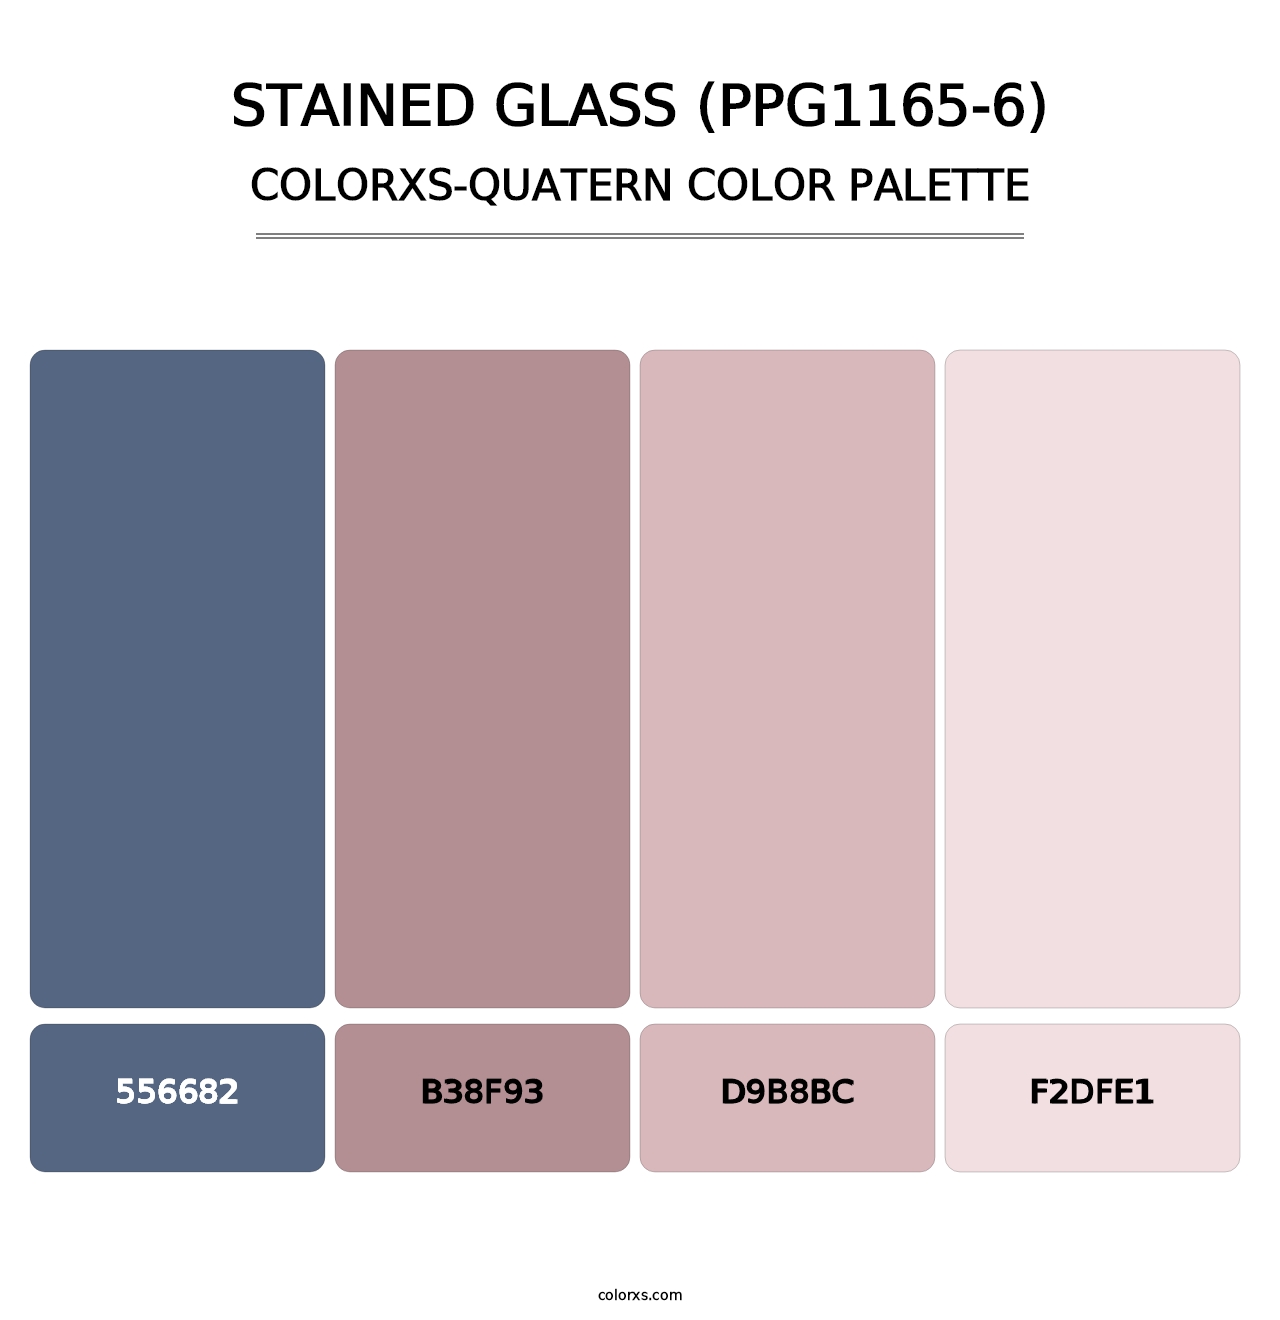 Stained Glass (PPG1165-6) - Colorxs Quatern Palette